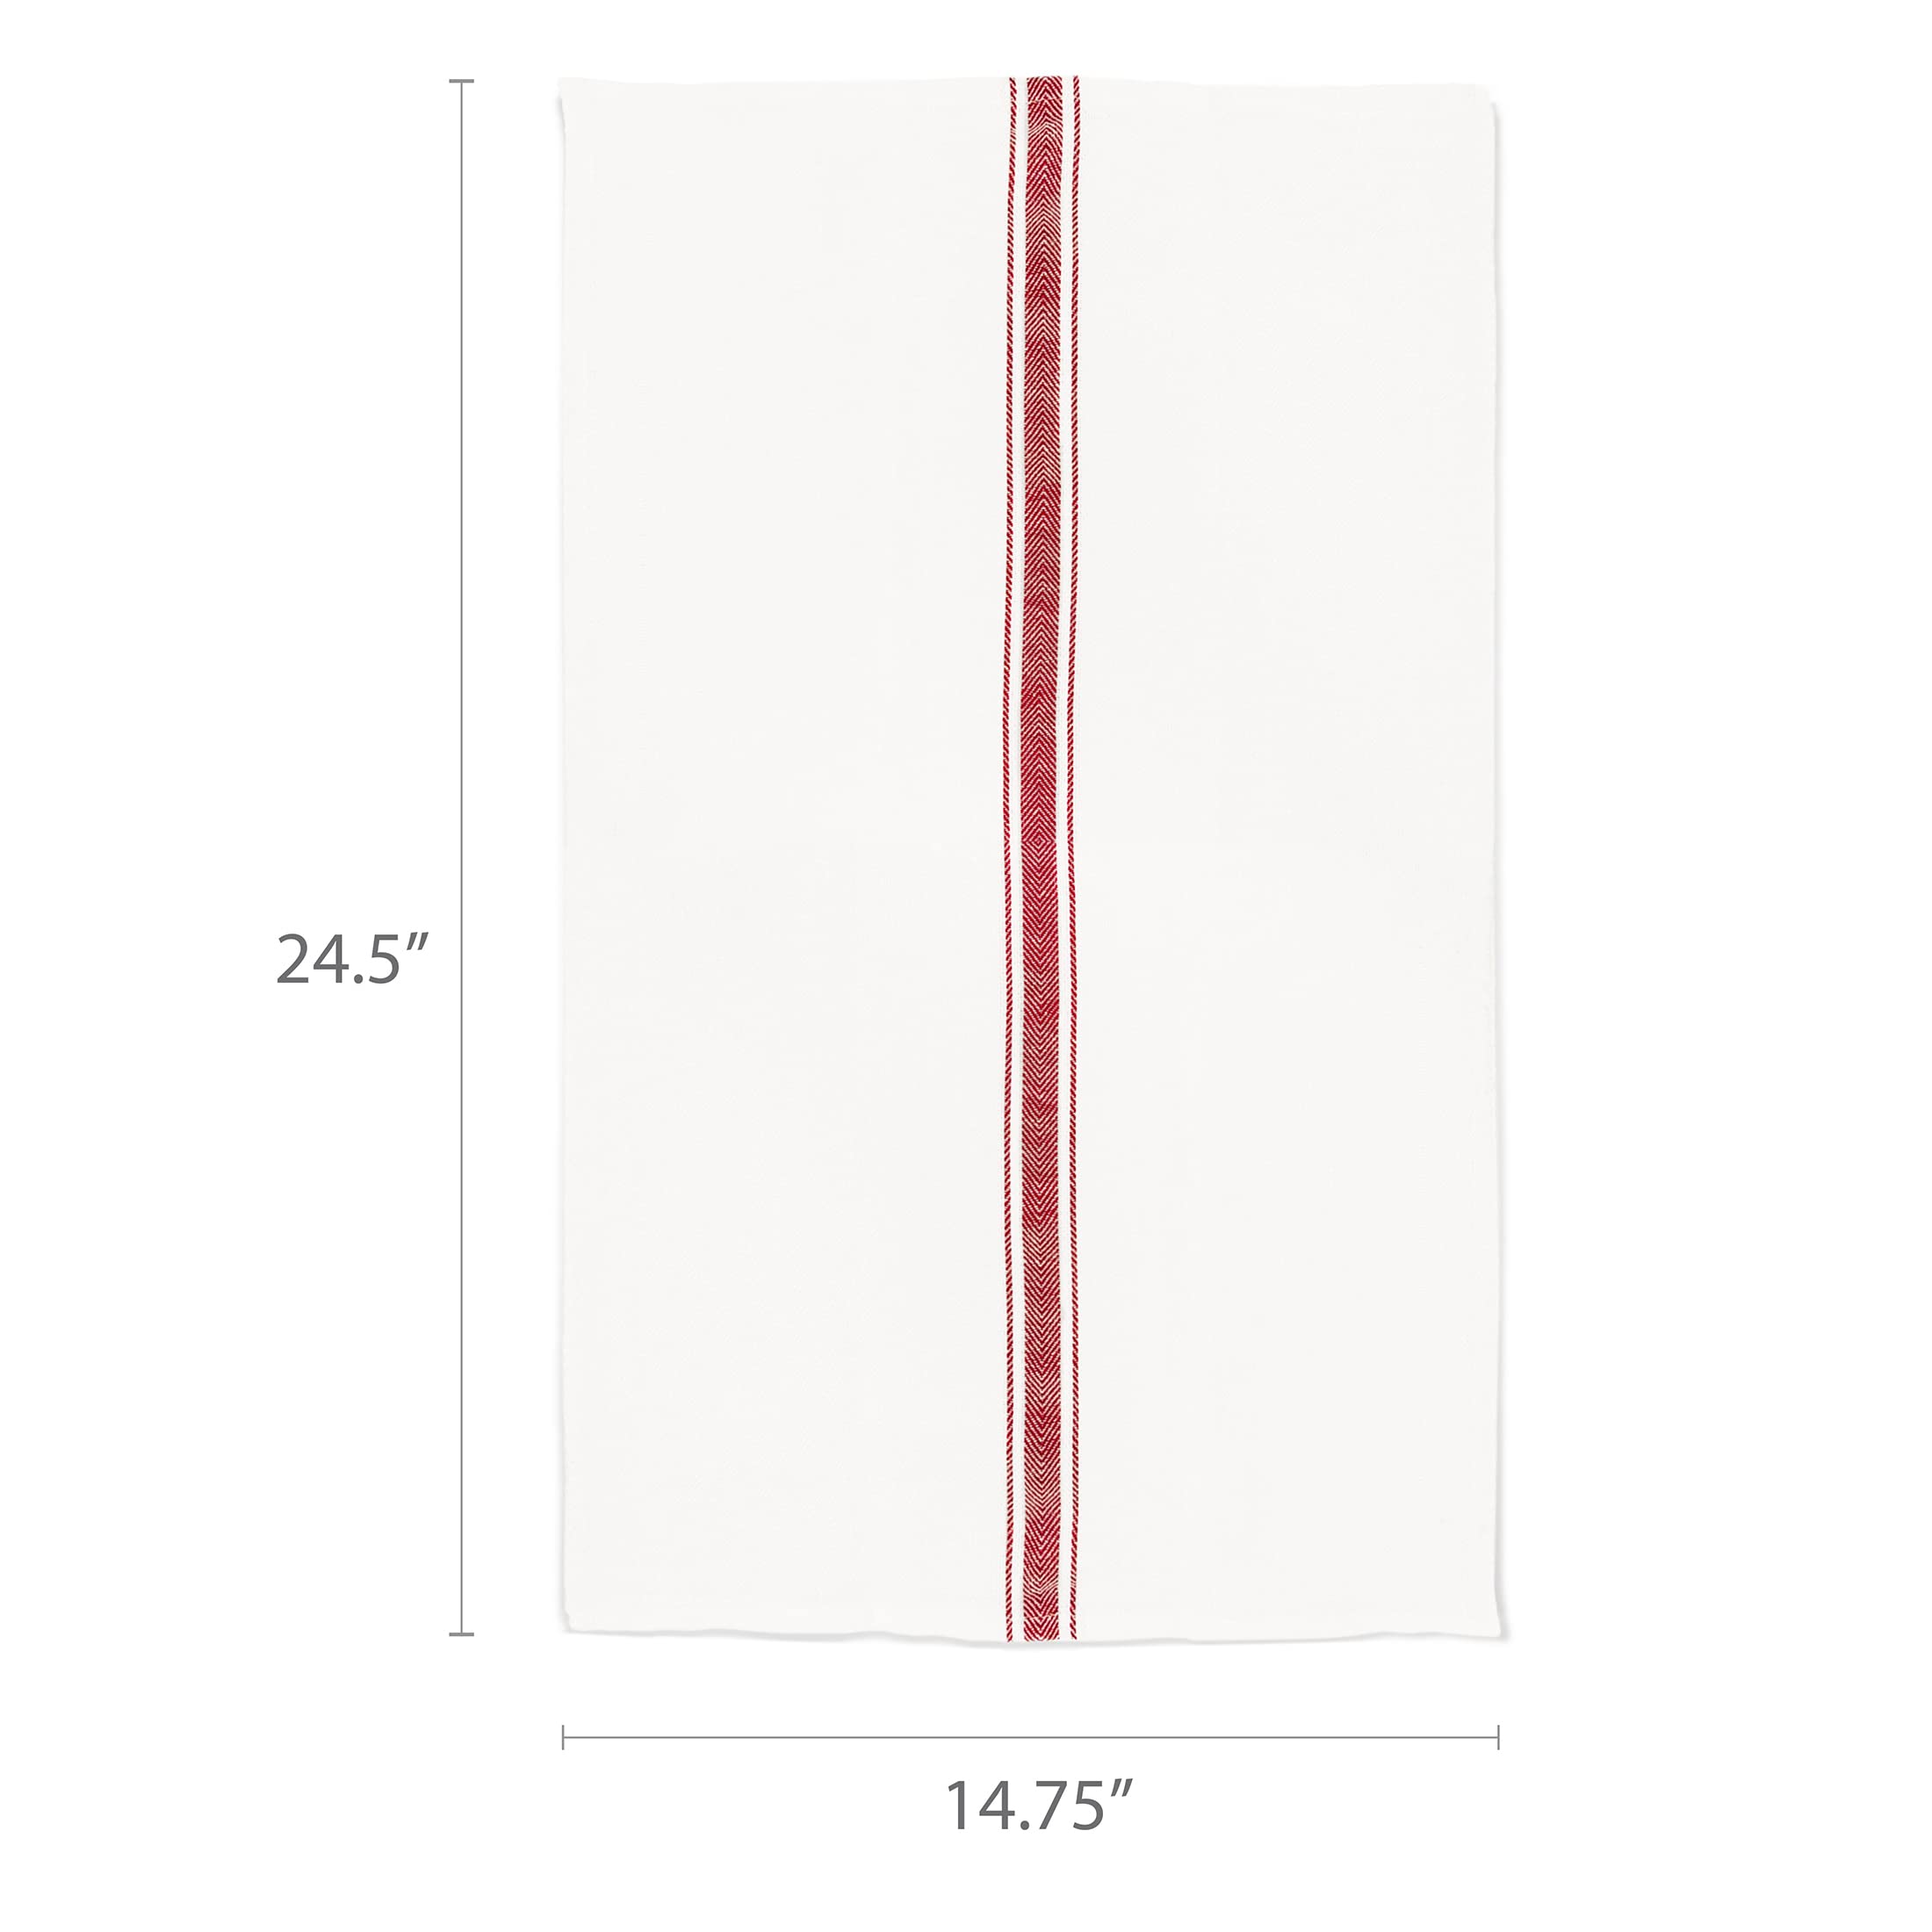 Nouvelle Legende Cotton Kitchen and Dish Towels, 14.75 x 24.5 Inches, White with Red Herringbone Stripes, 6 Pack